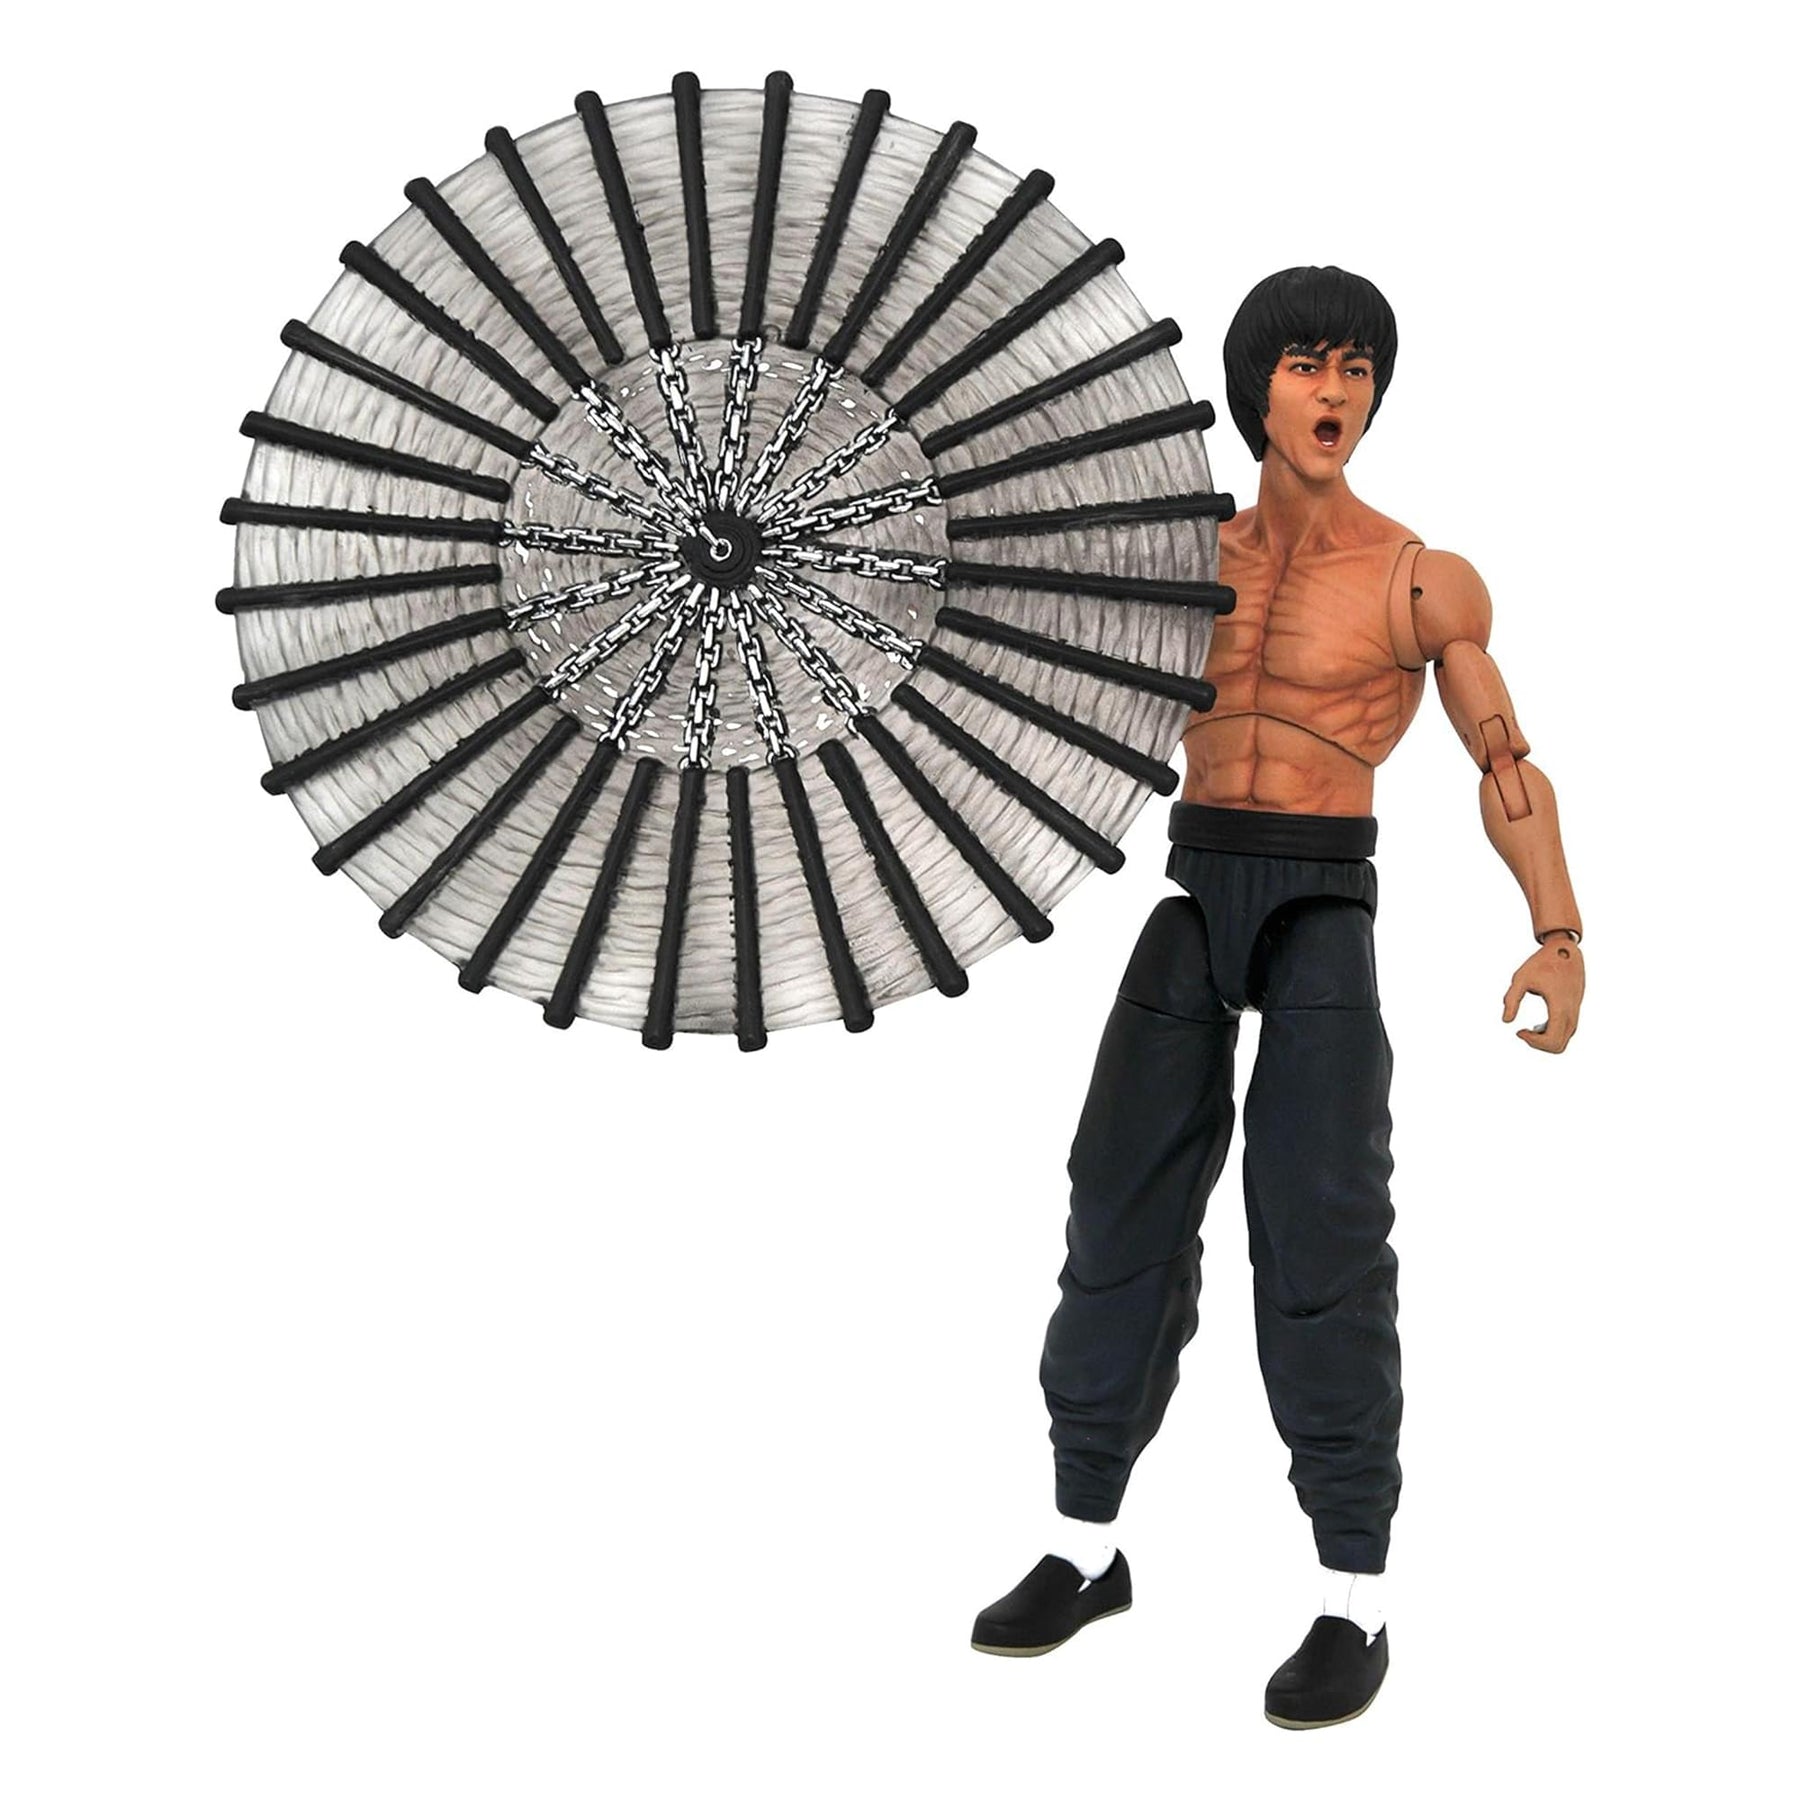 Bruce Lee 7 Inch Action Figure